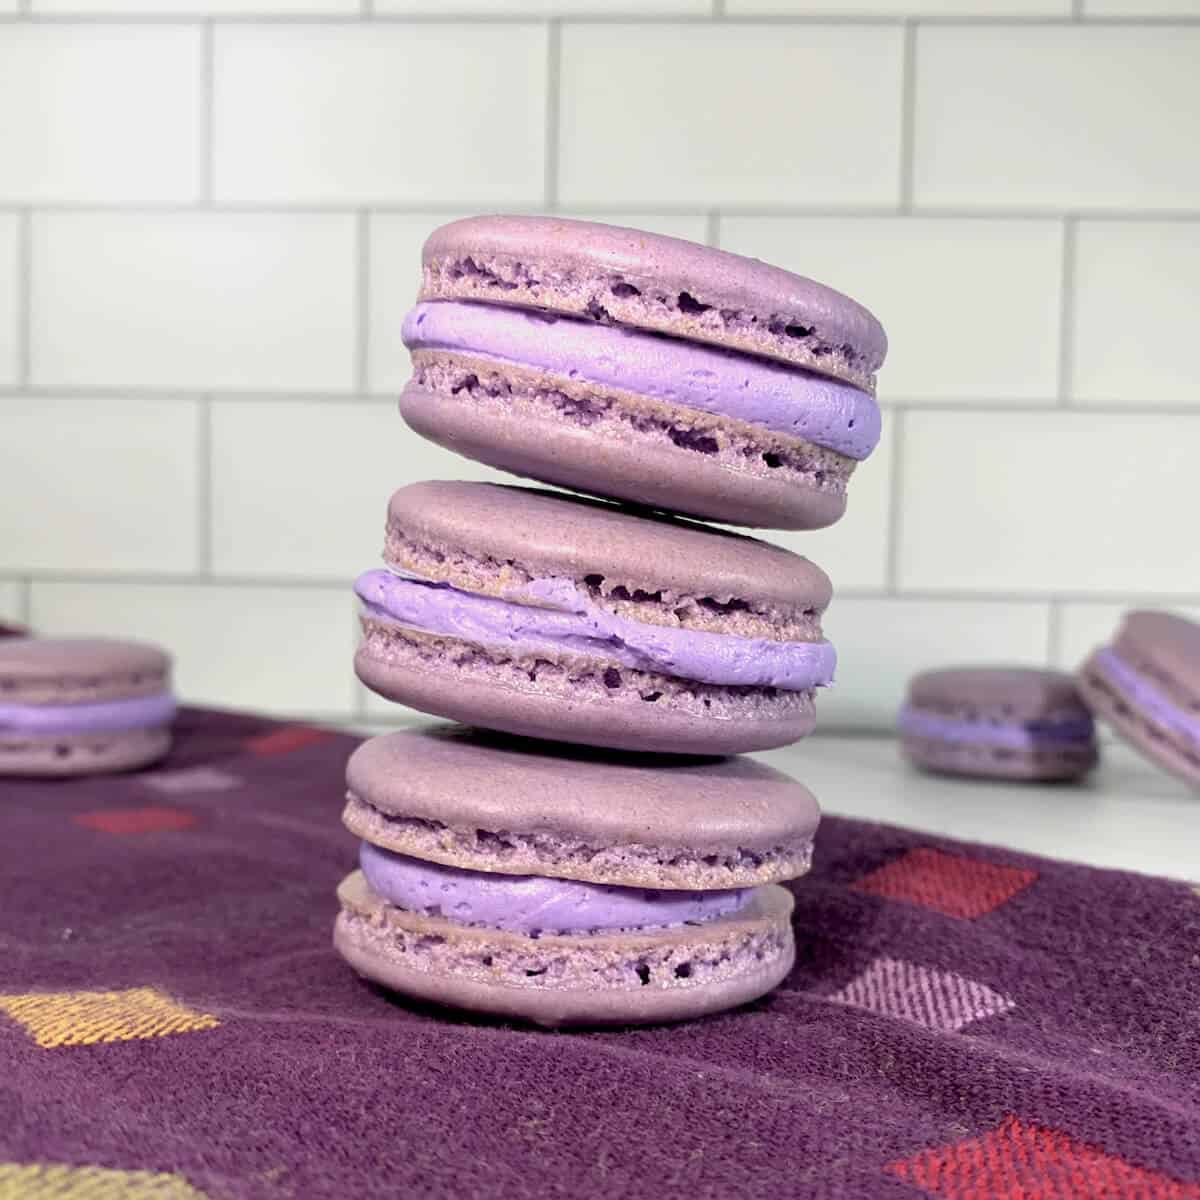 French Macarons with purple buttercream stacked on a purple towel with more in background